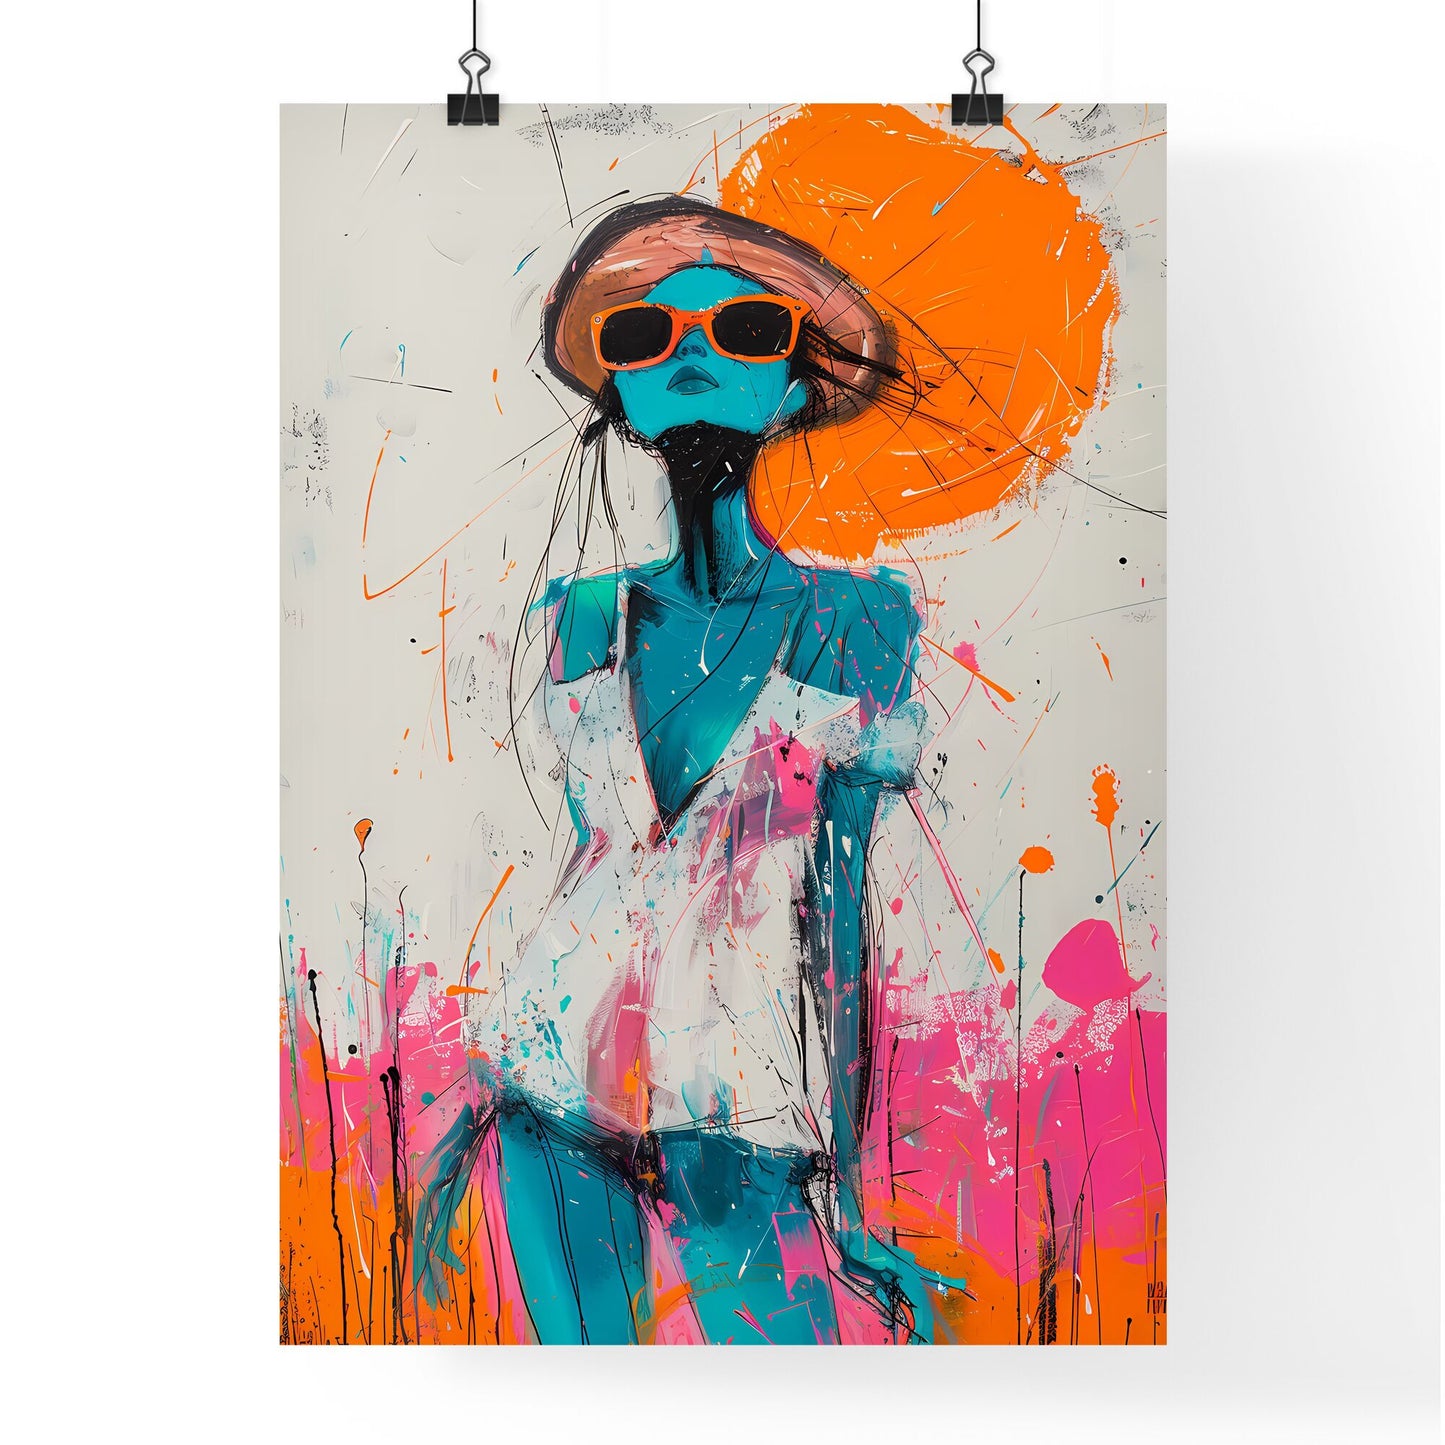 Whimsical Expressionist Masterpiece: Vibrant Painting of Woman in Sunglasses and Dress, Featuring Orange Highlights and Pastel Hues Default Title